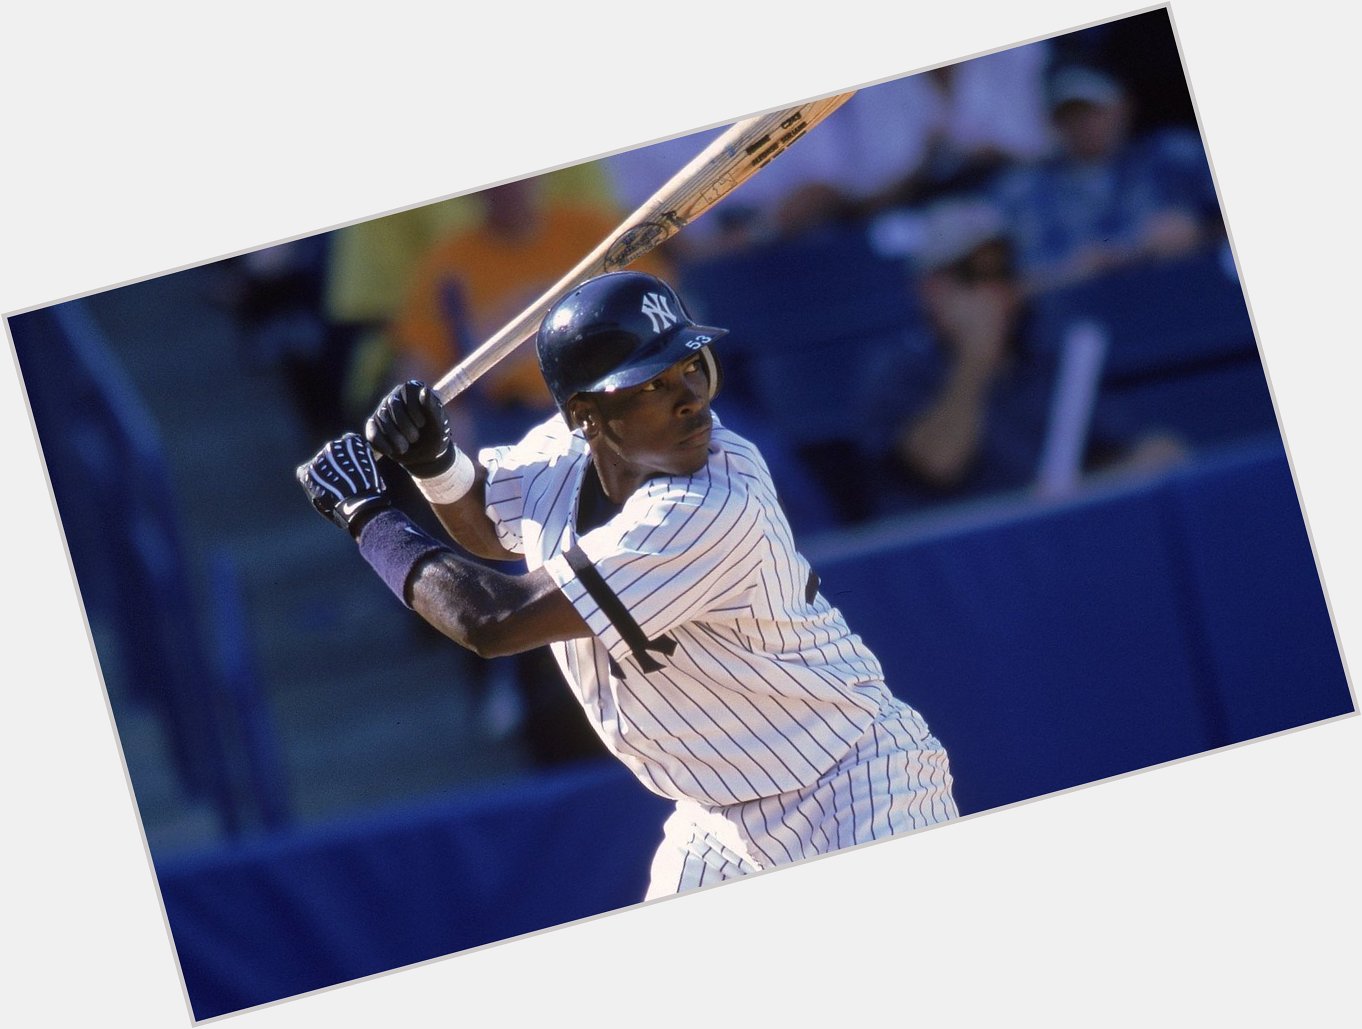 YESNetwork \"to wish Alfonso Soriano a happy 44th birthday!   